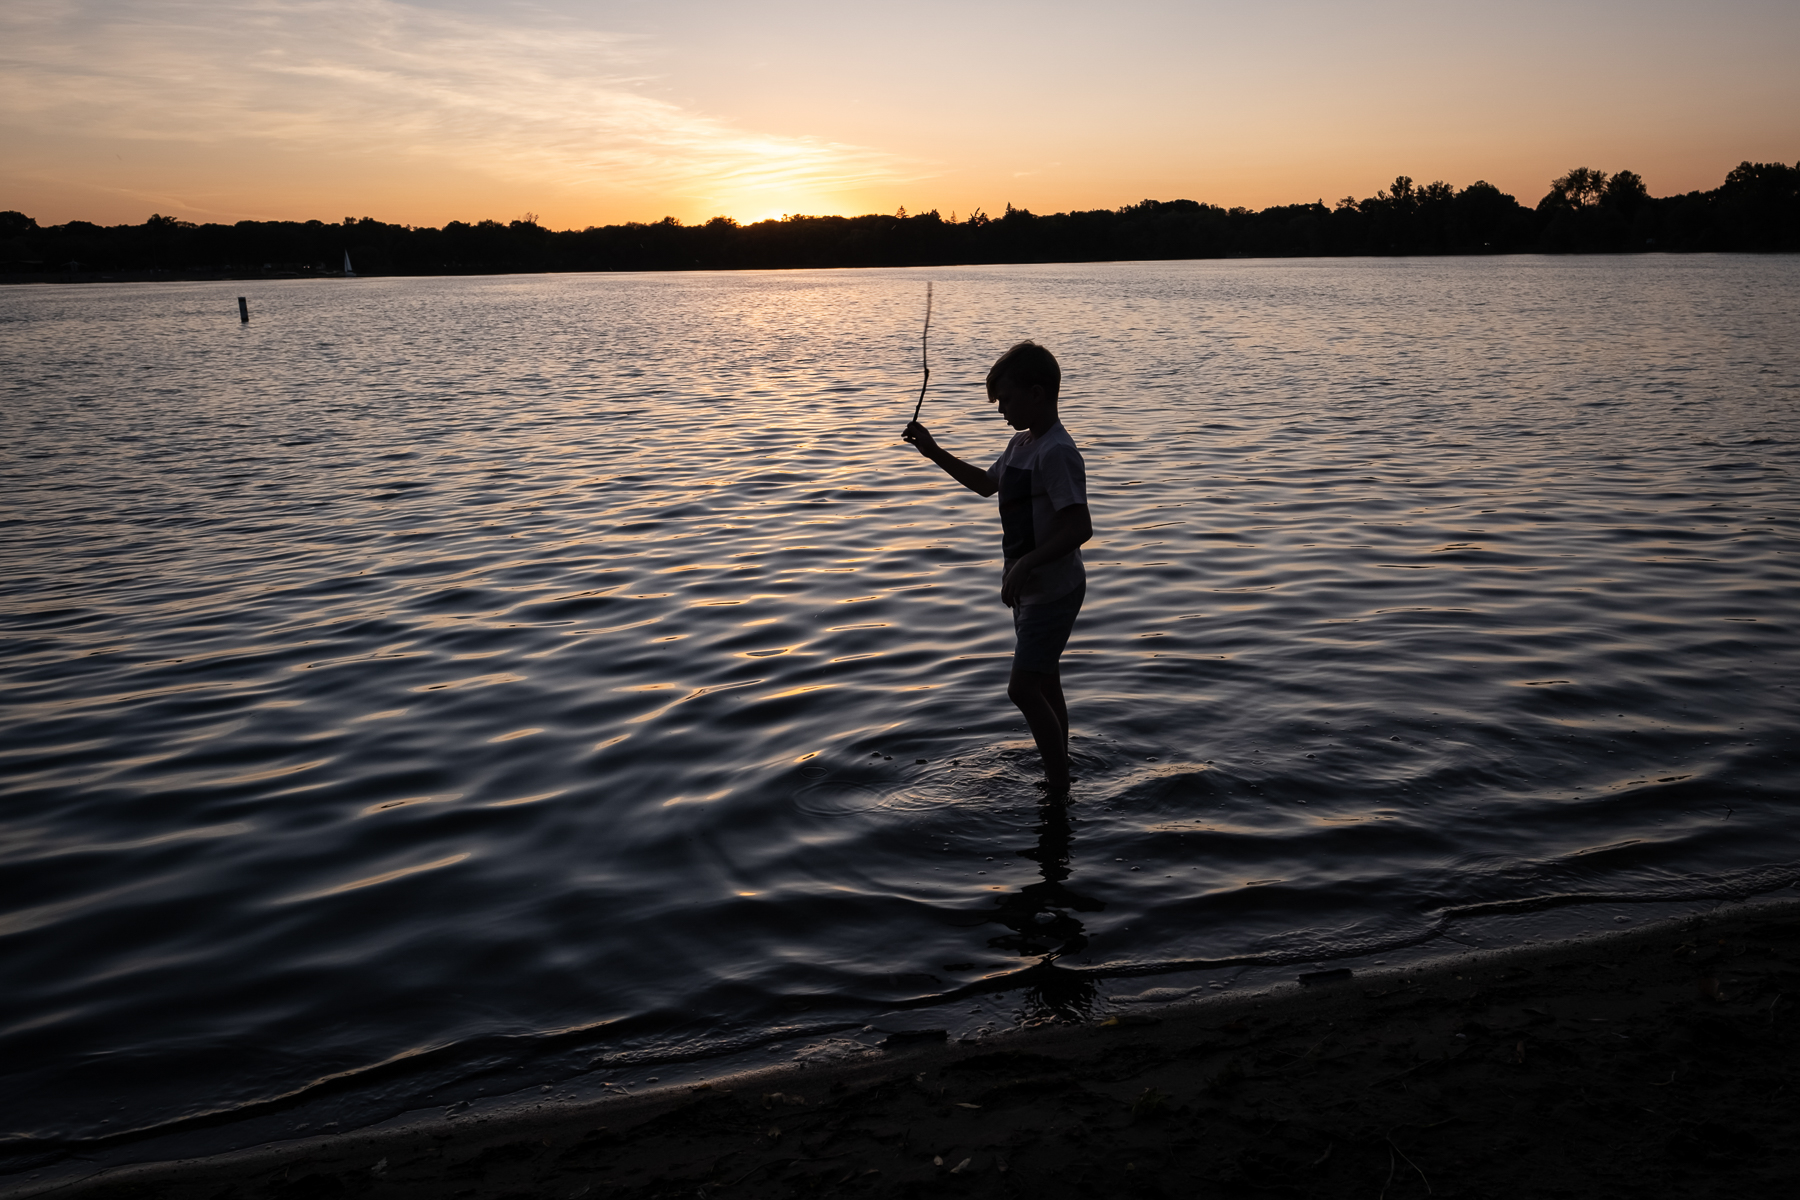 MINNEAPOLIS, MN - AUGUST 13, 2021: Finley Stoks, 9, of St. Paul, MN, plays in the water at Lake Nokomis on a clear night in Minneapolis. Recent wildfires in Canada brought some of the worst air quality to Minneapolis this summer, impacting what the Stoks family was able to do outside.